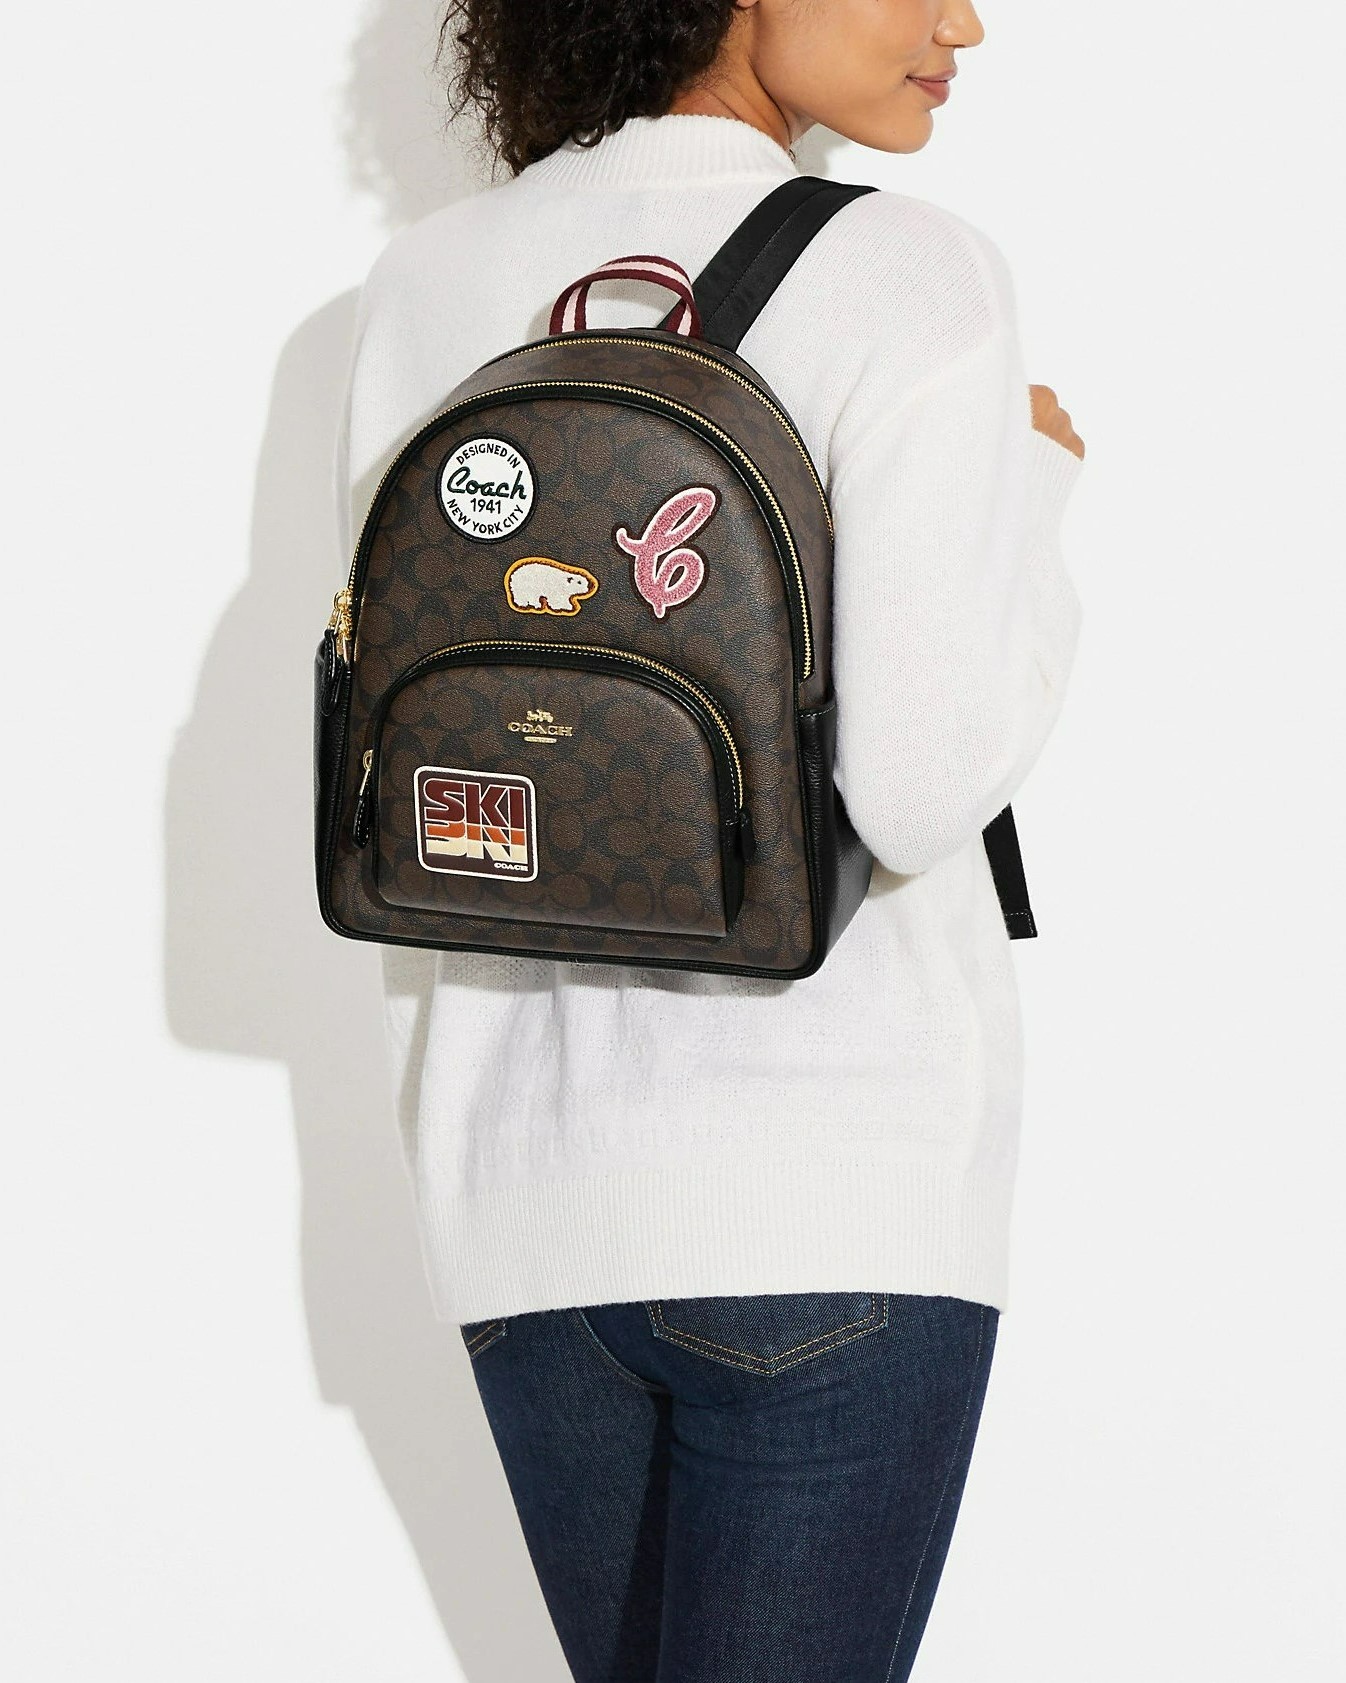 BALO COACH 1941 COURT BACKPACK IN SIGNATURE CANVAS WITH SKI PATCHES 3